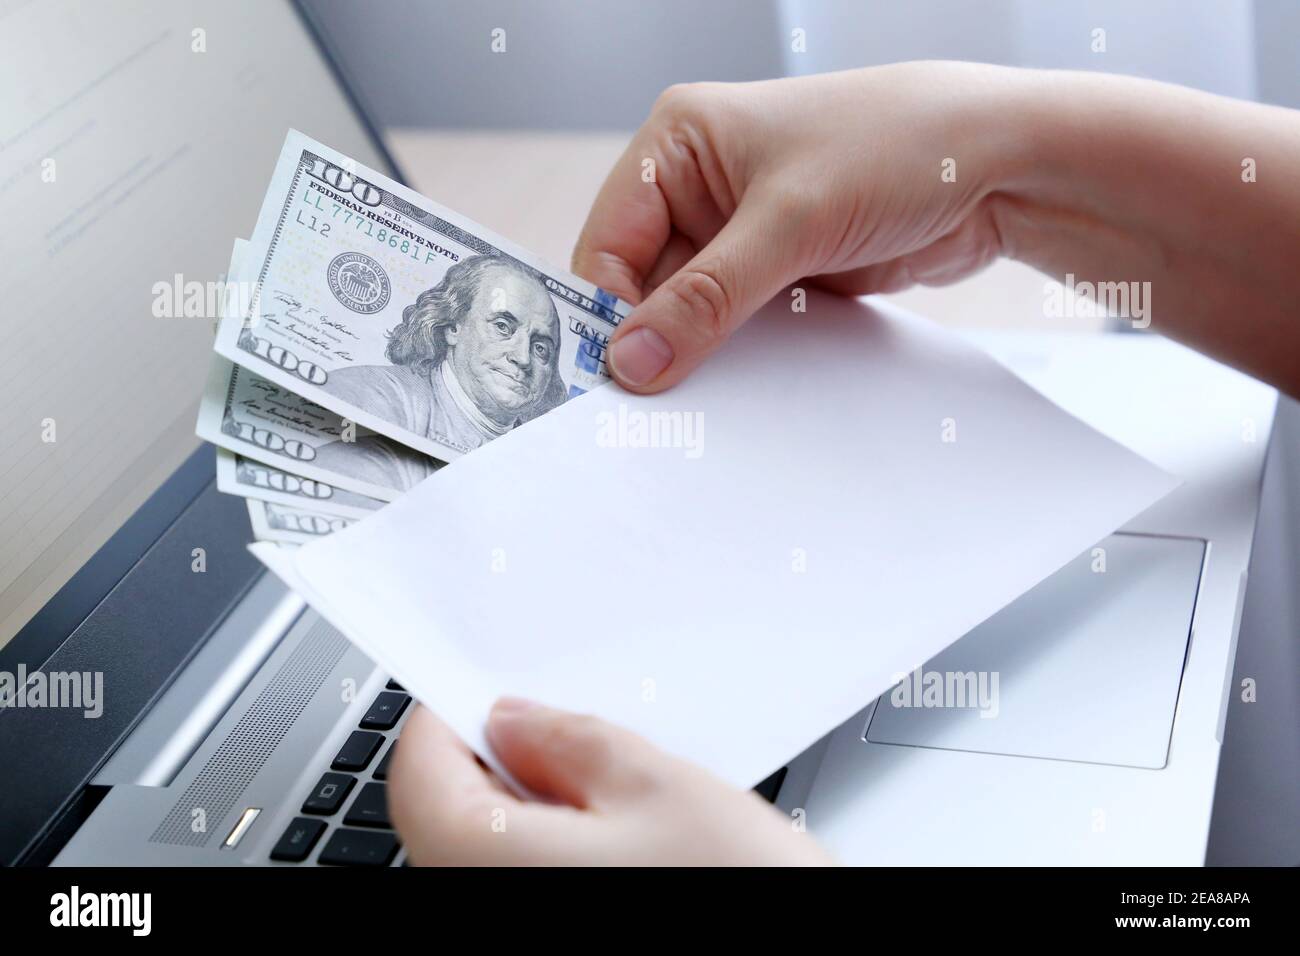 Envelope with US dollars in female hands. Woman pulls money out of an envelope on laptop background, wages, bonus or bribe concept Stock Photo